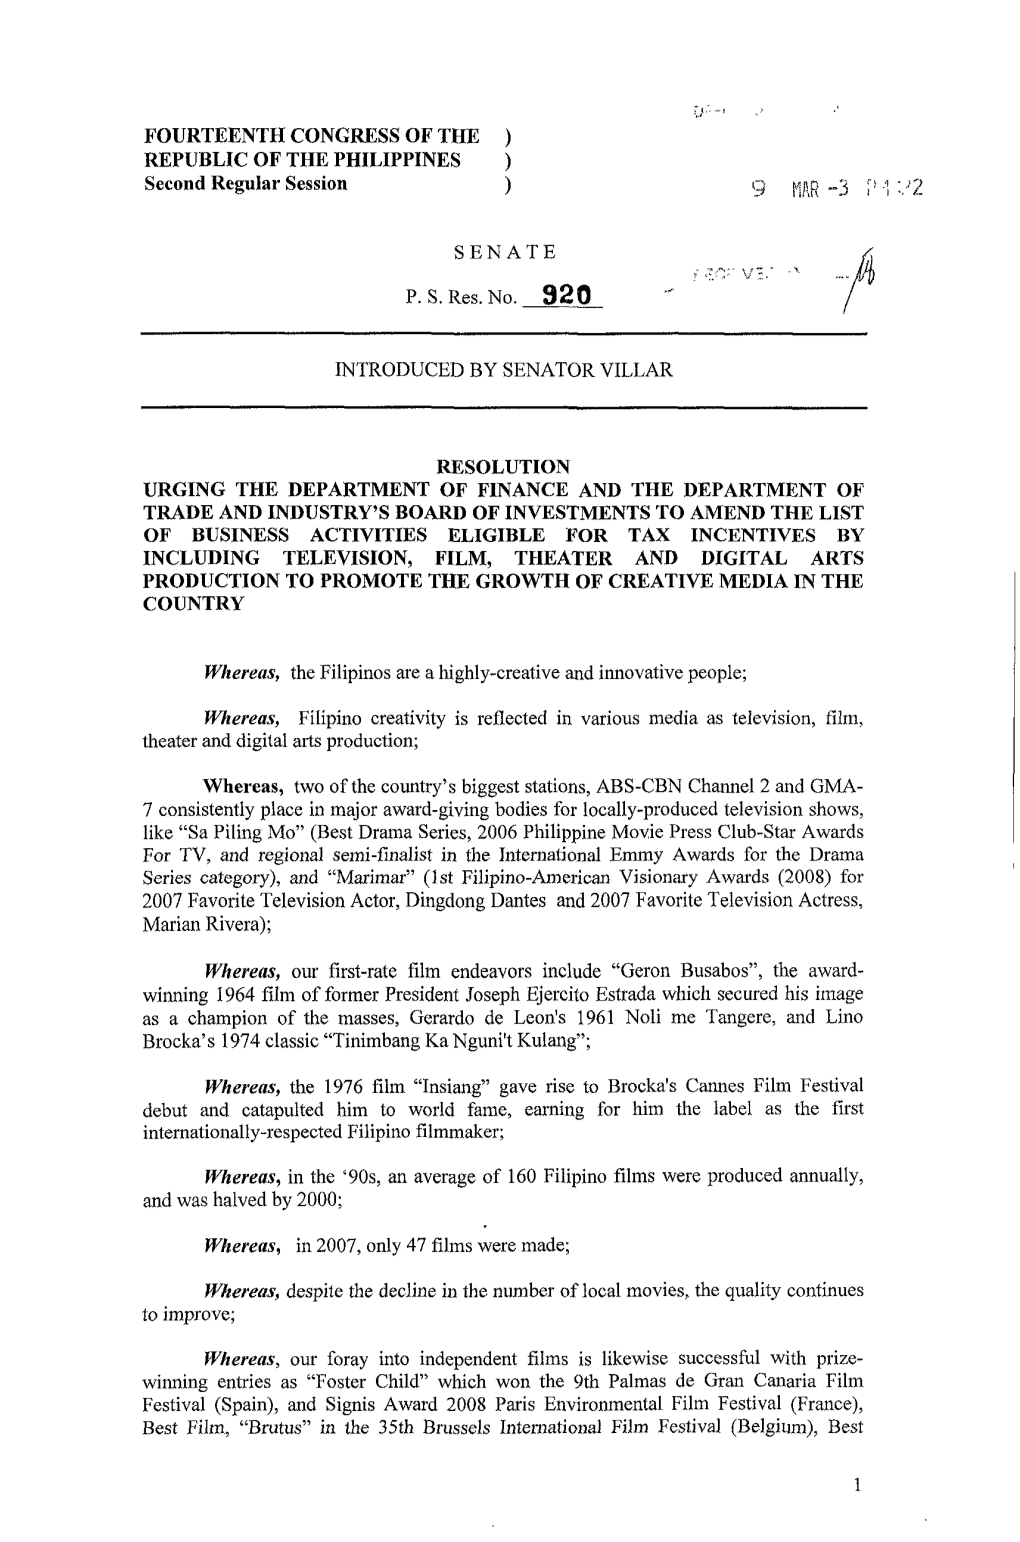 FOURTEENTH CONGRESS of the ) REPUBLIC of the PHILIPPINES ) Second Regular Session SENATE a P. S. Res. No. 920 INTRODUCED by SENA